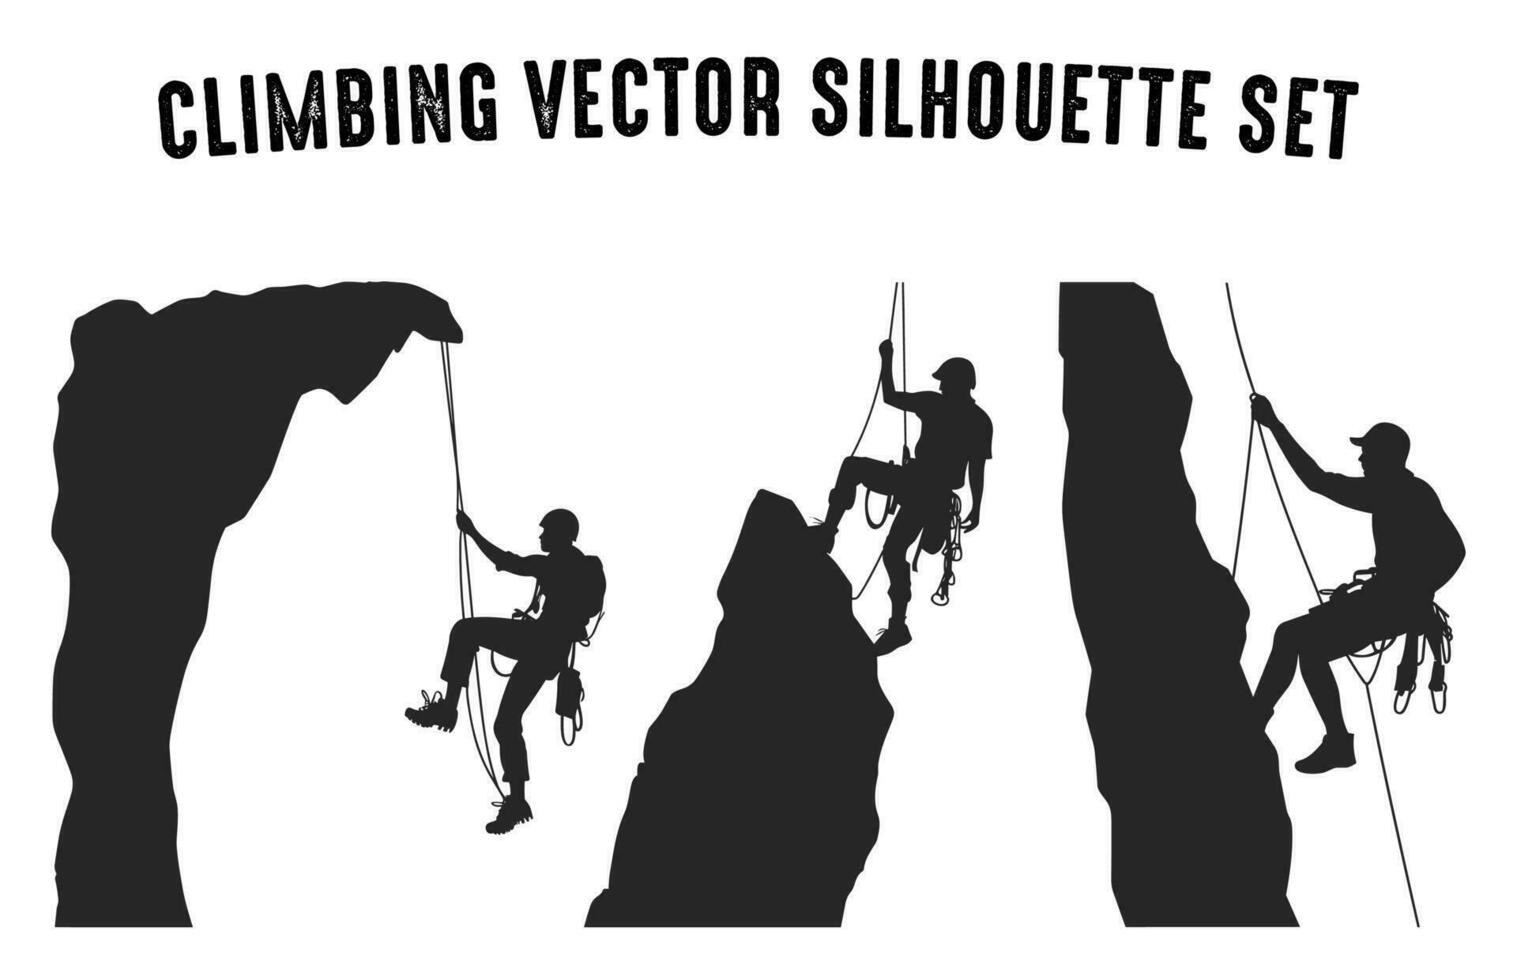 Free Climber Silhouettes Vector Bundle, Mountain Climbing Silhouettes in different poses, Rock climber black silhouette Set